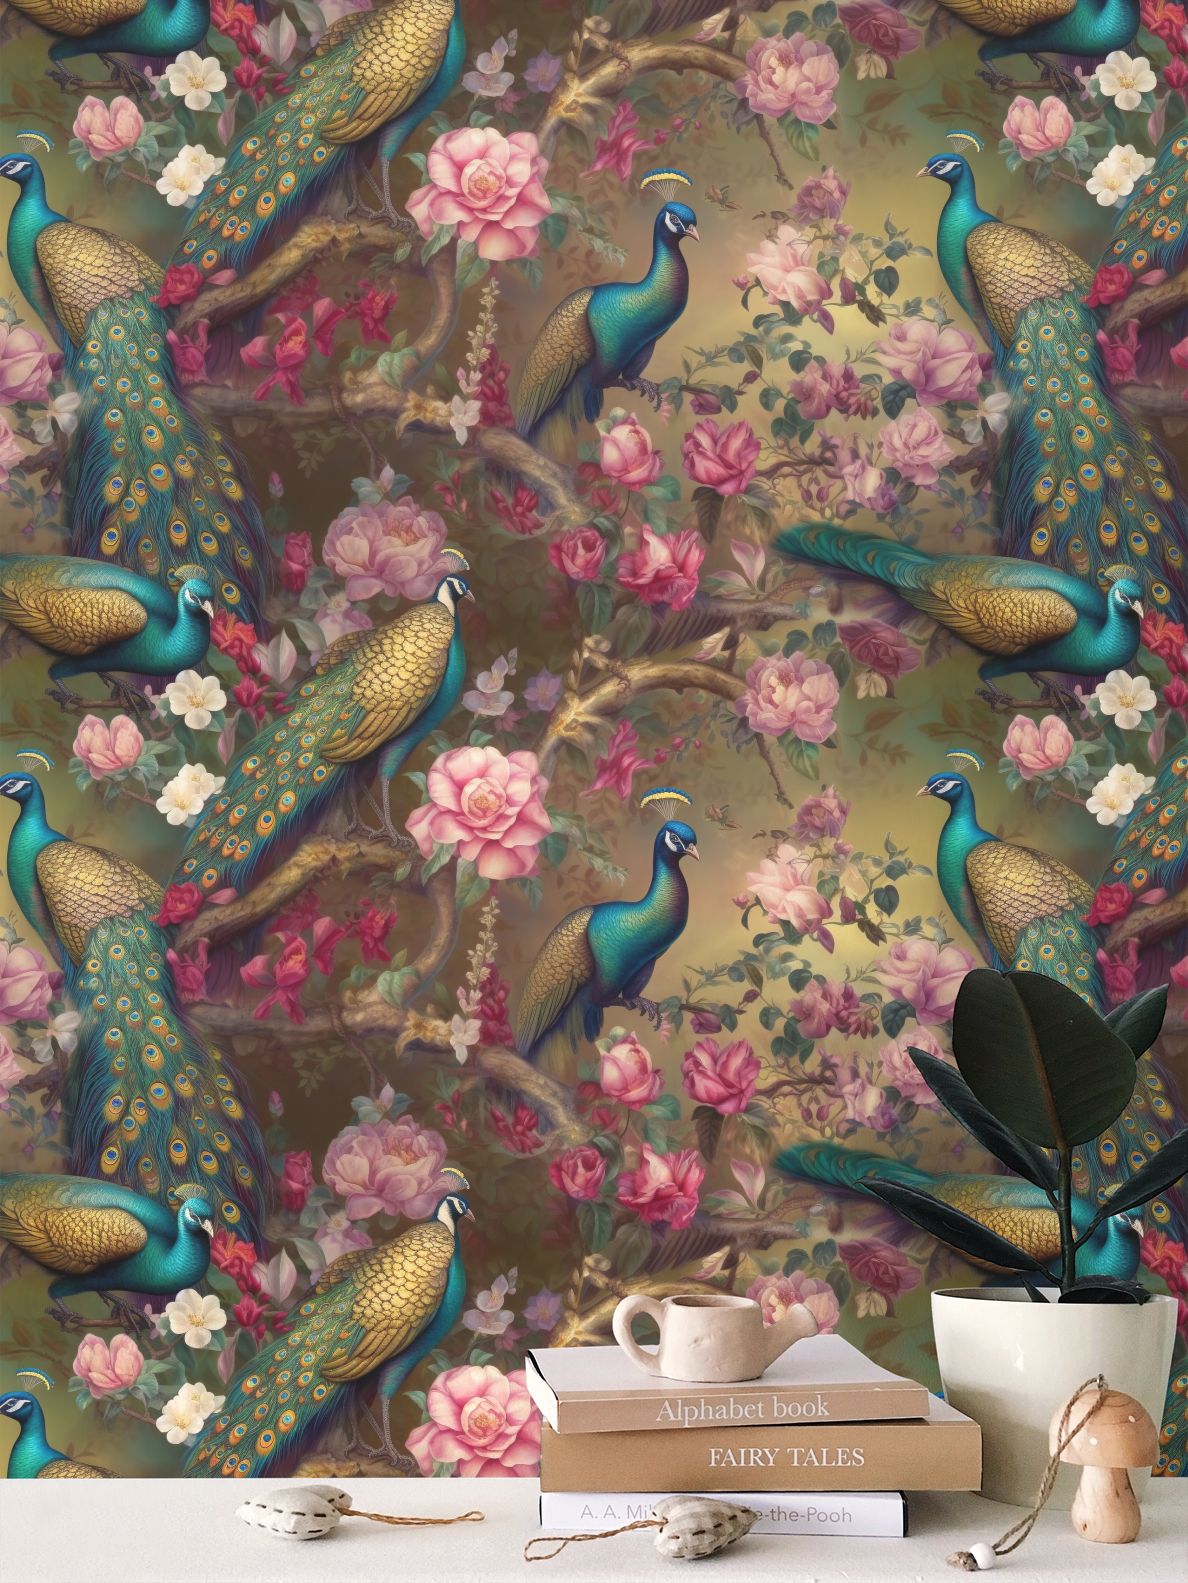 Gilded Peacock Romance Repeat Pattern Wallpaper